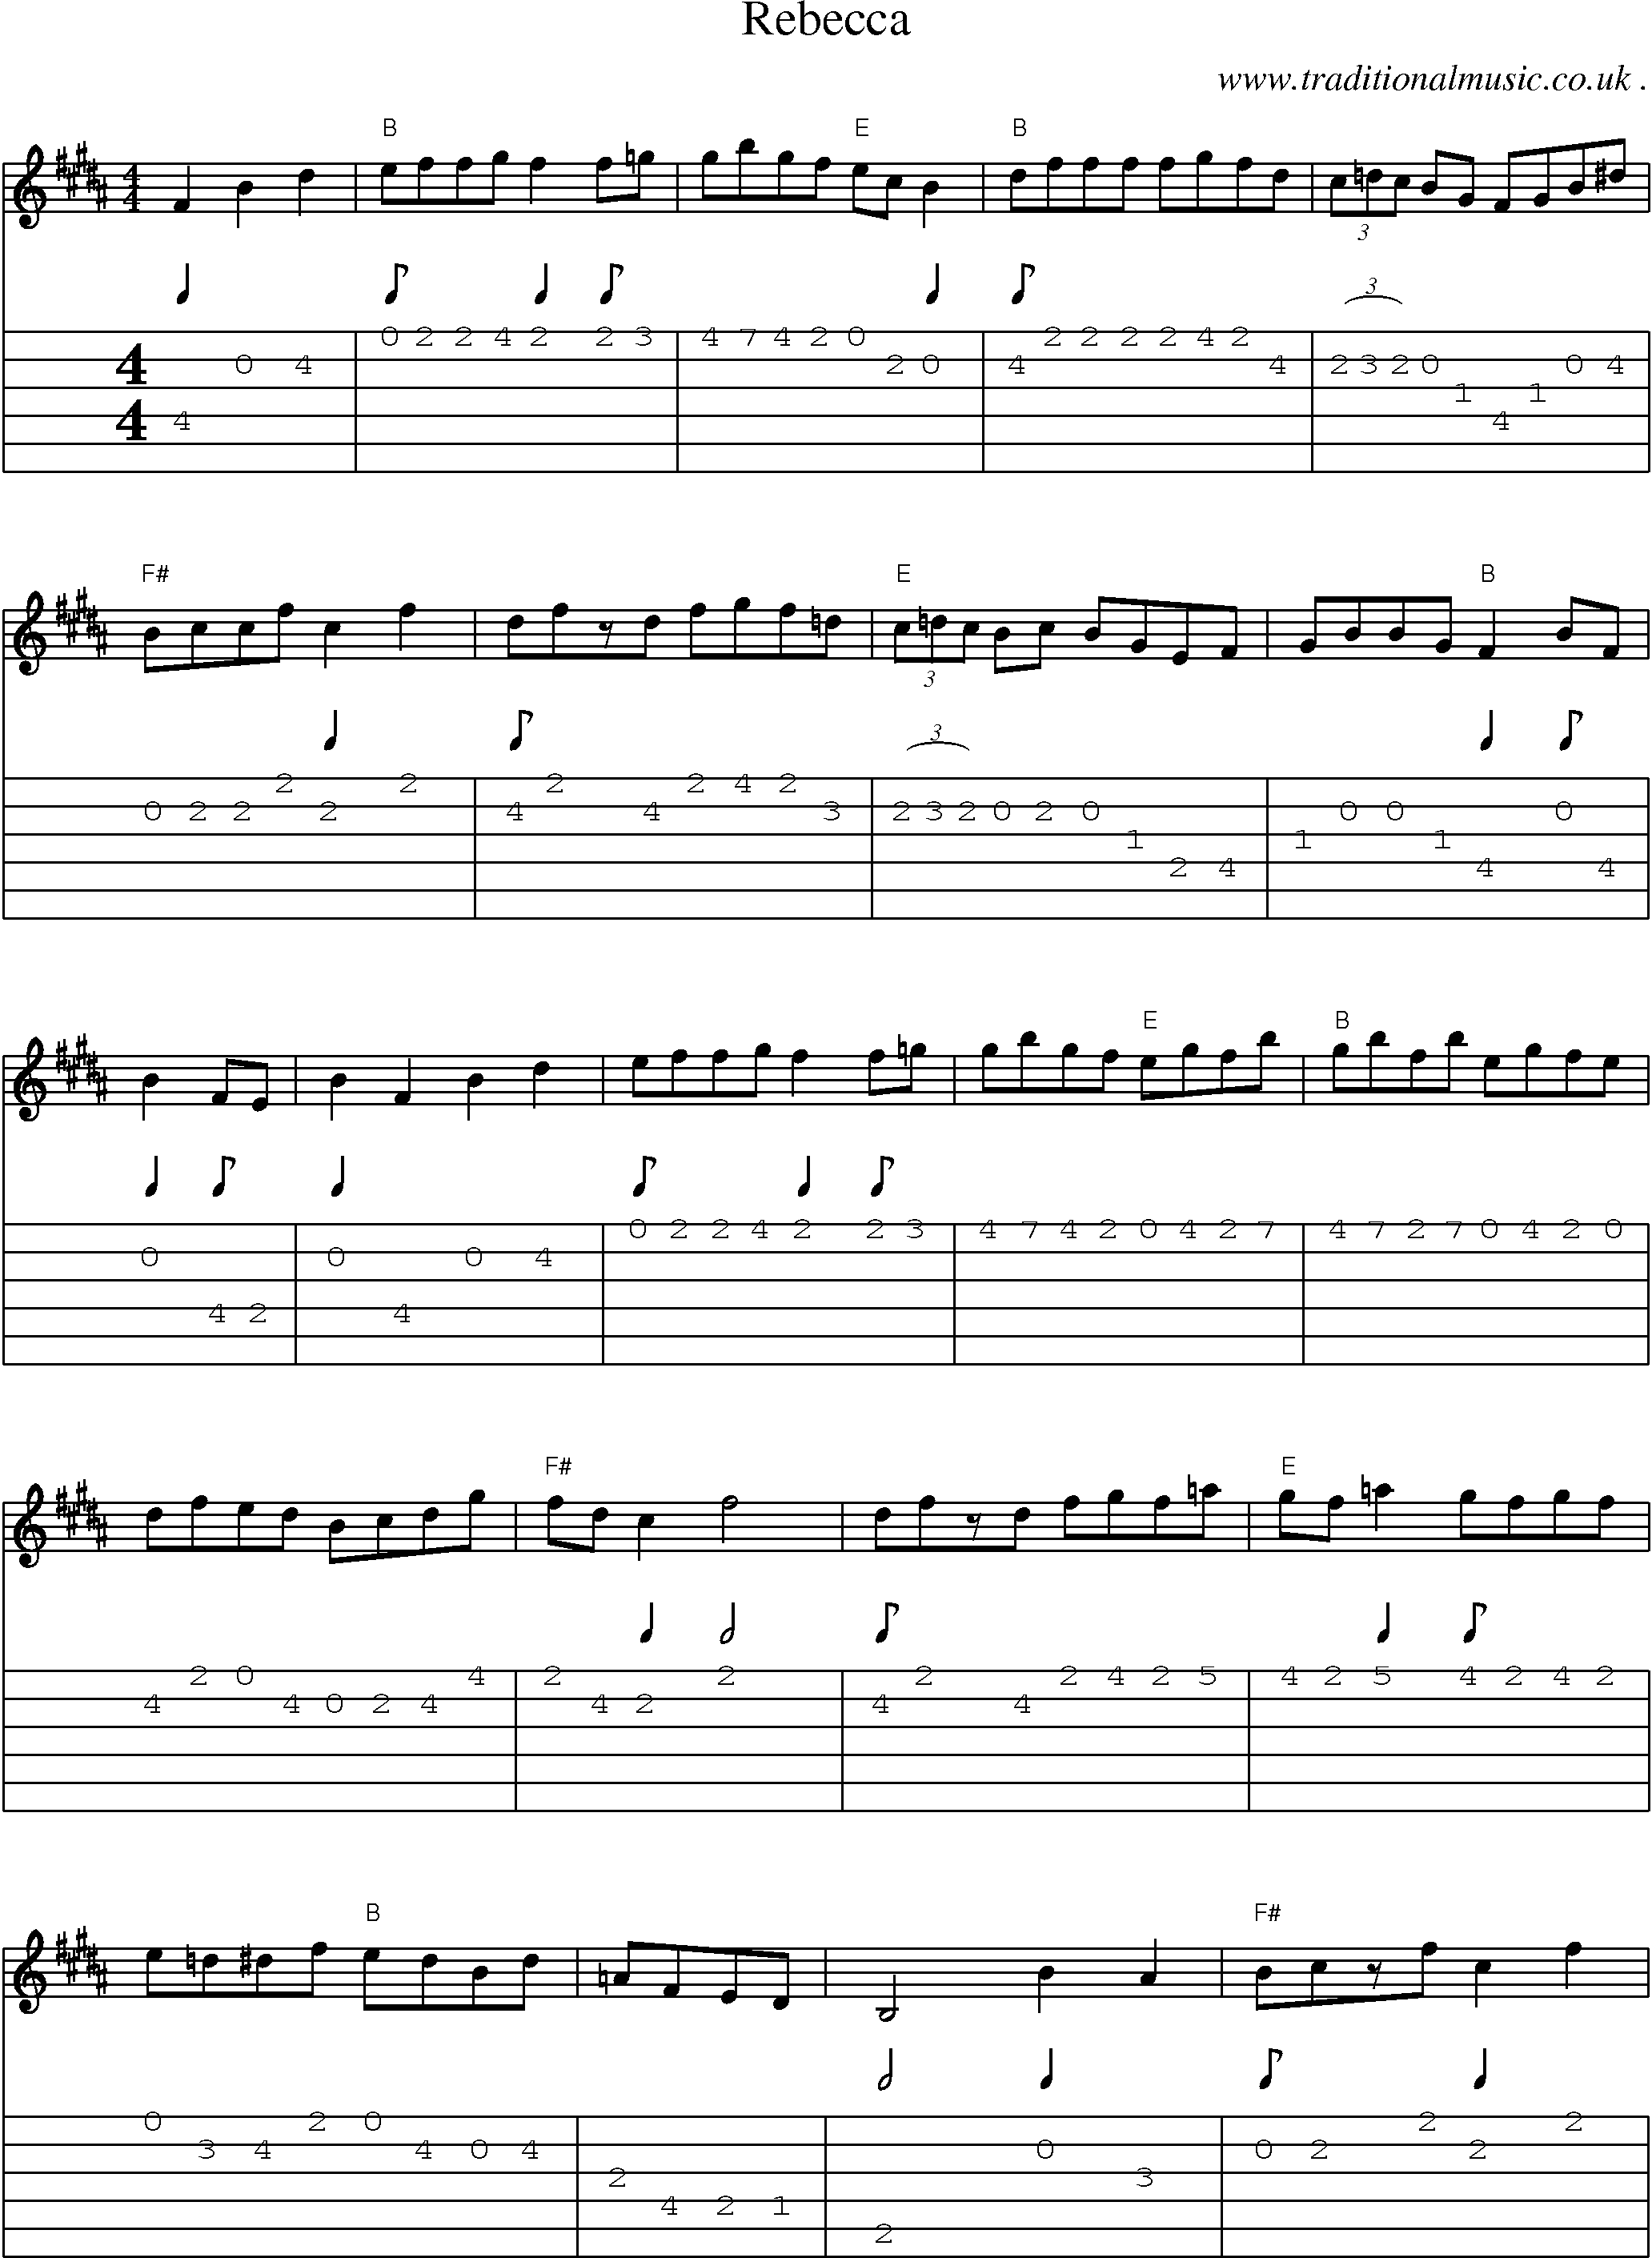 Music Score and Guitar Tabs for Rebecca